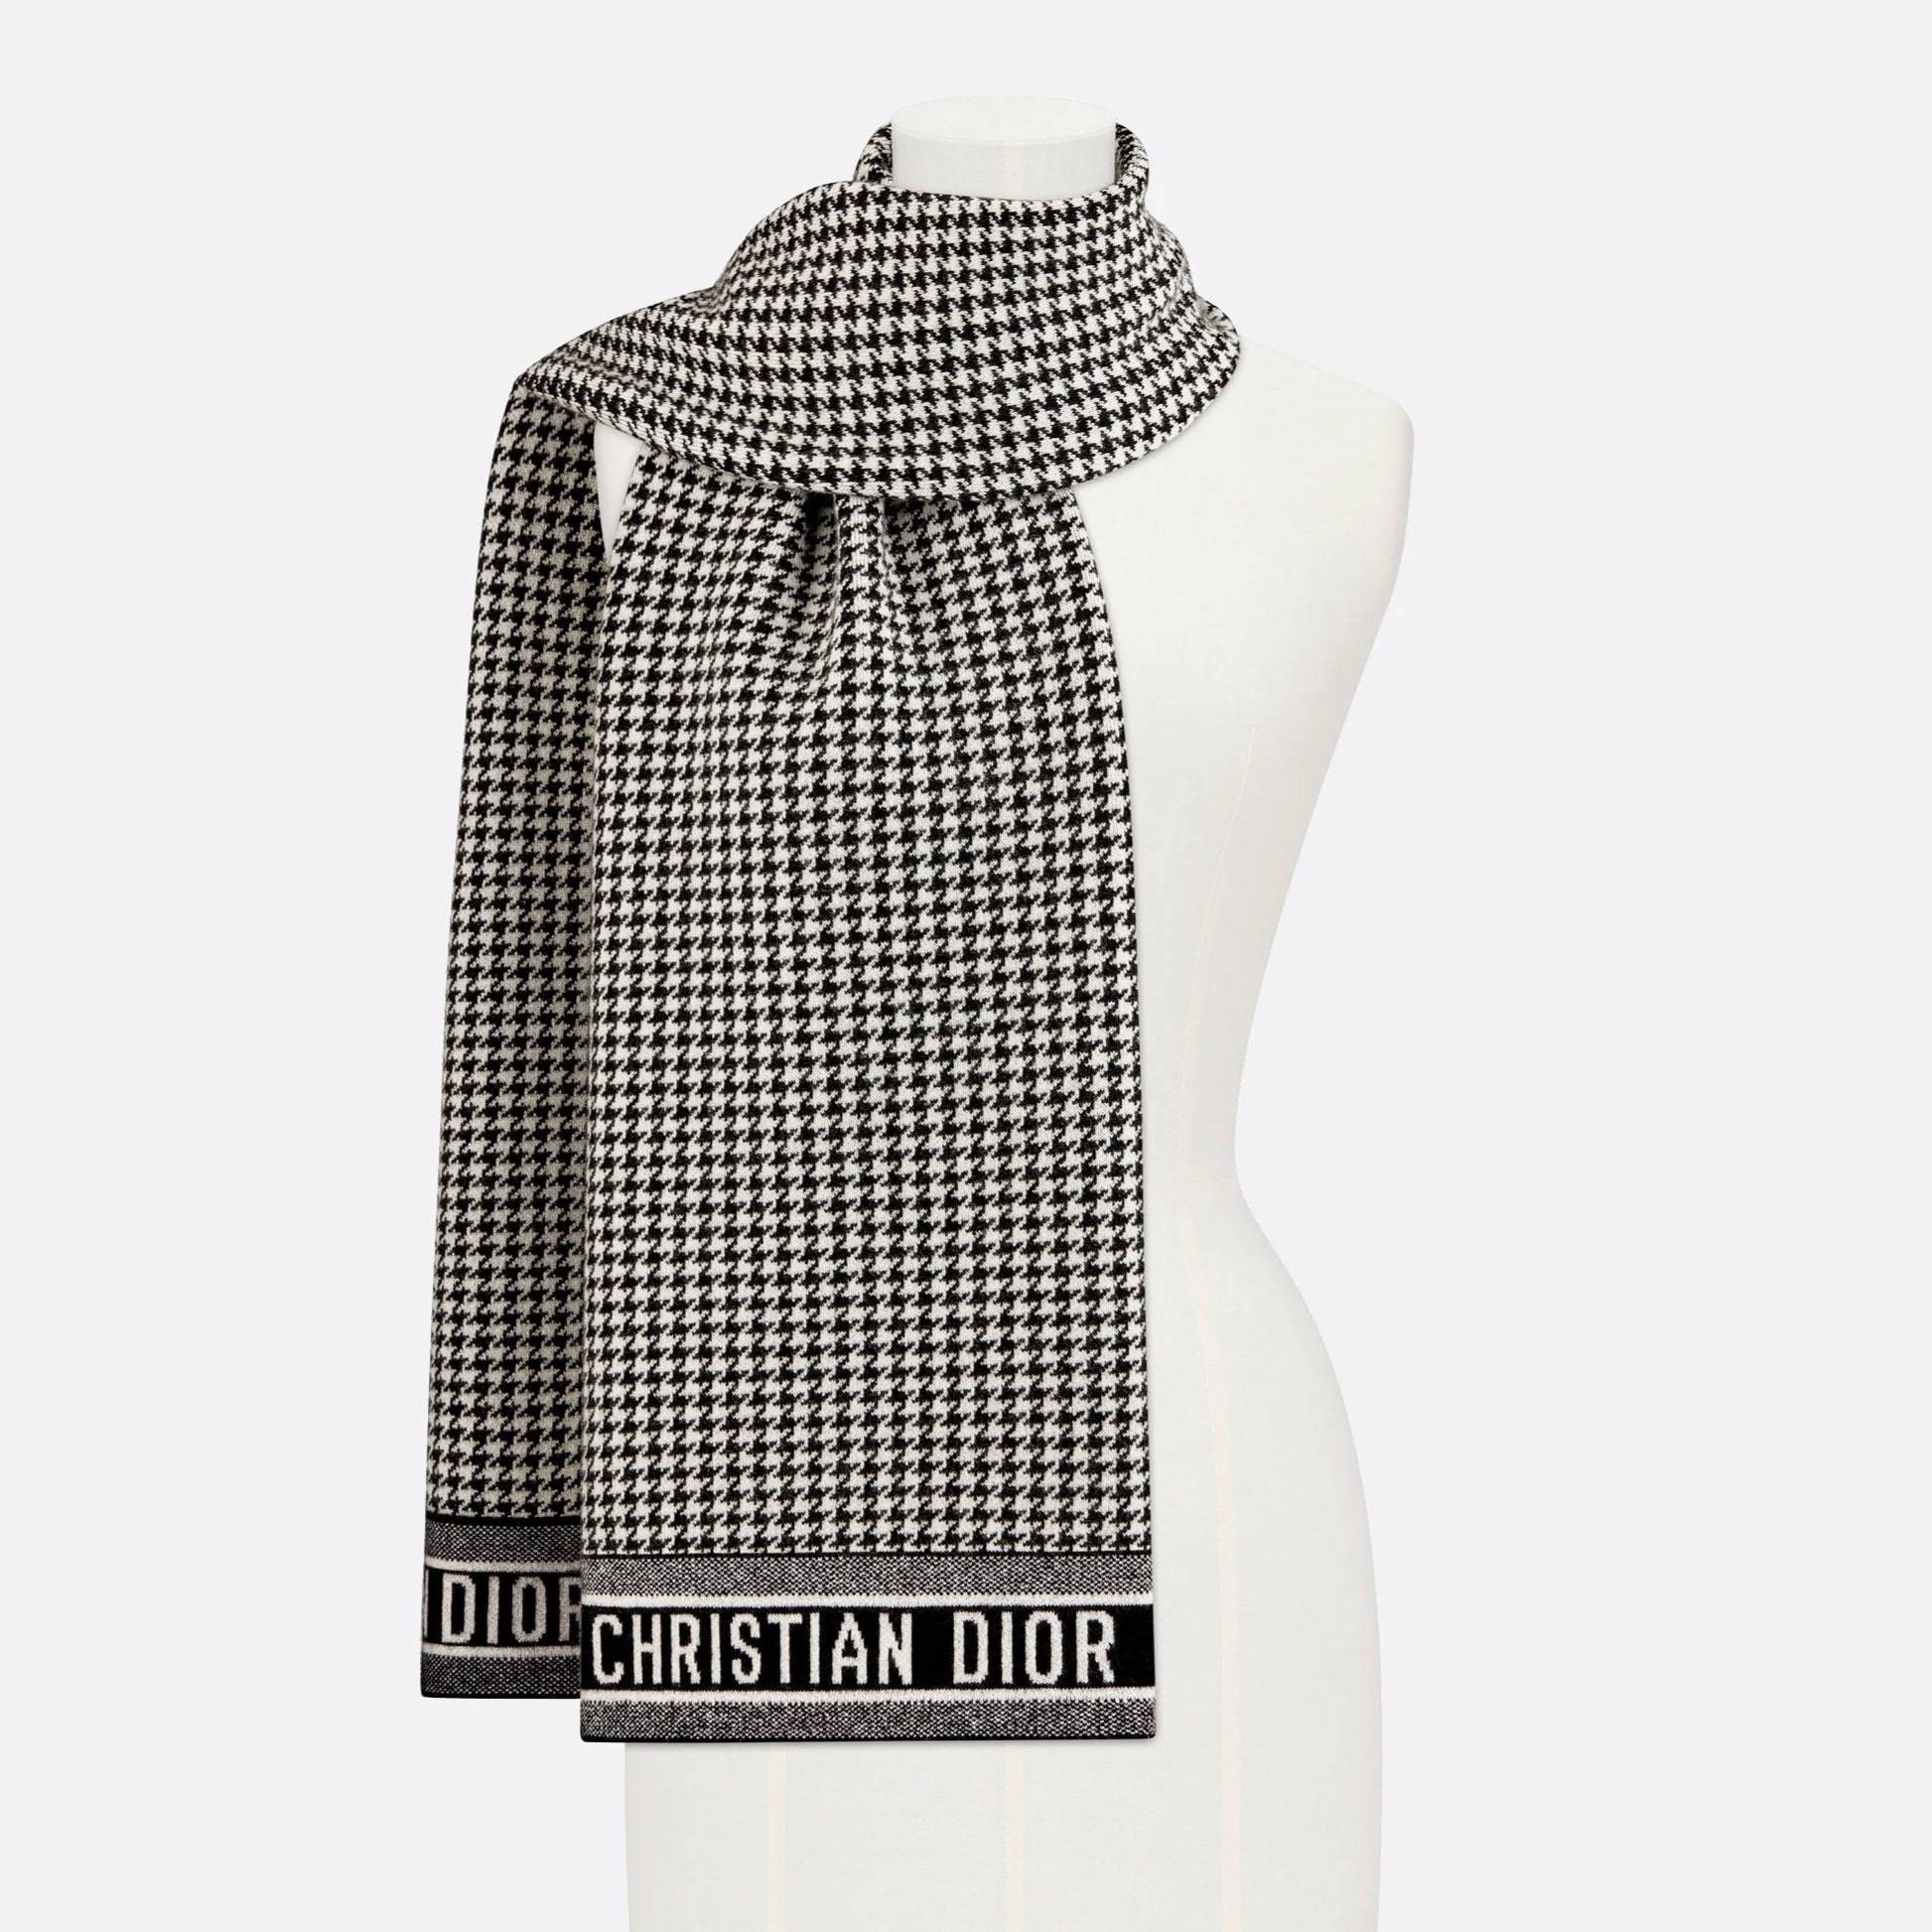 KHĂN CHOÀNG CỖ DIOR 30 MONTAIGNE SCARF BLACK AND WHITE BLENDED CASHMERE KNIT 2